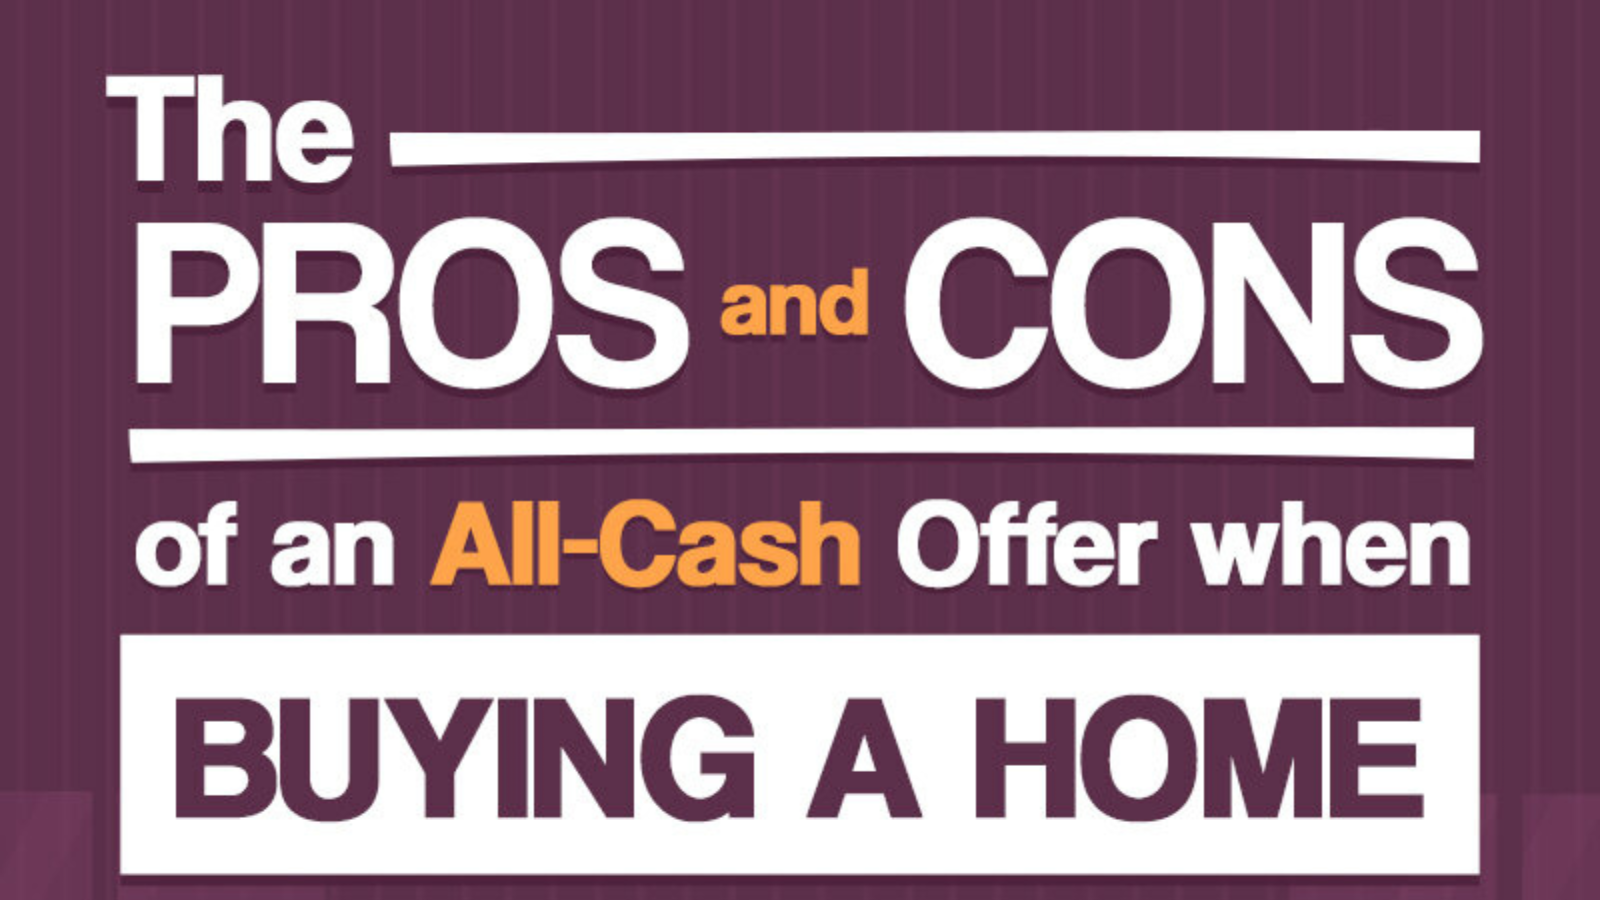 Thinking of Buying A Home With Cash? Here are the Pros and Cons